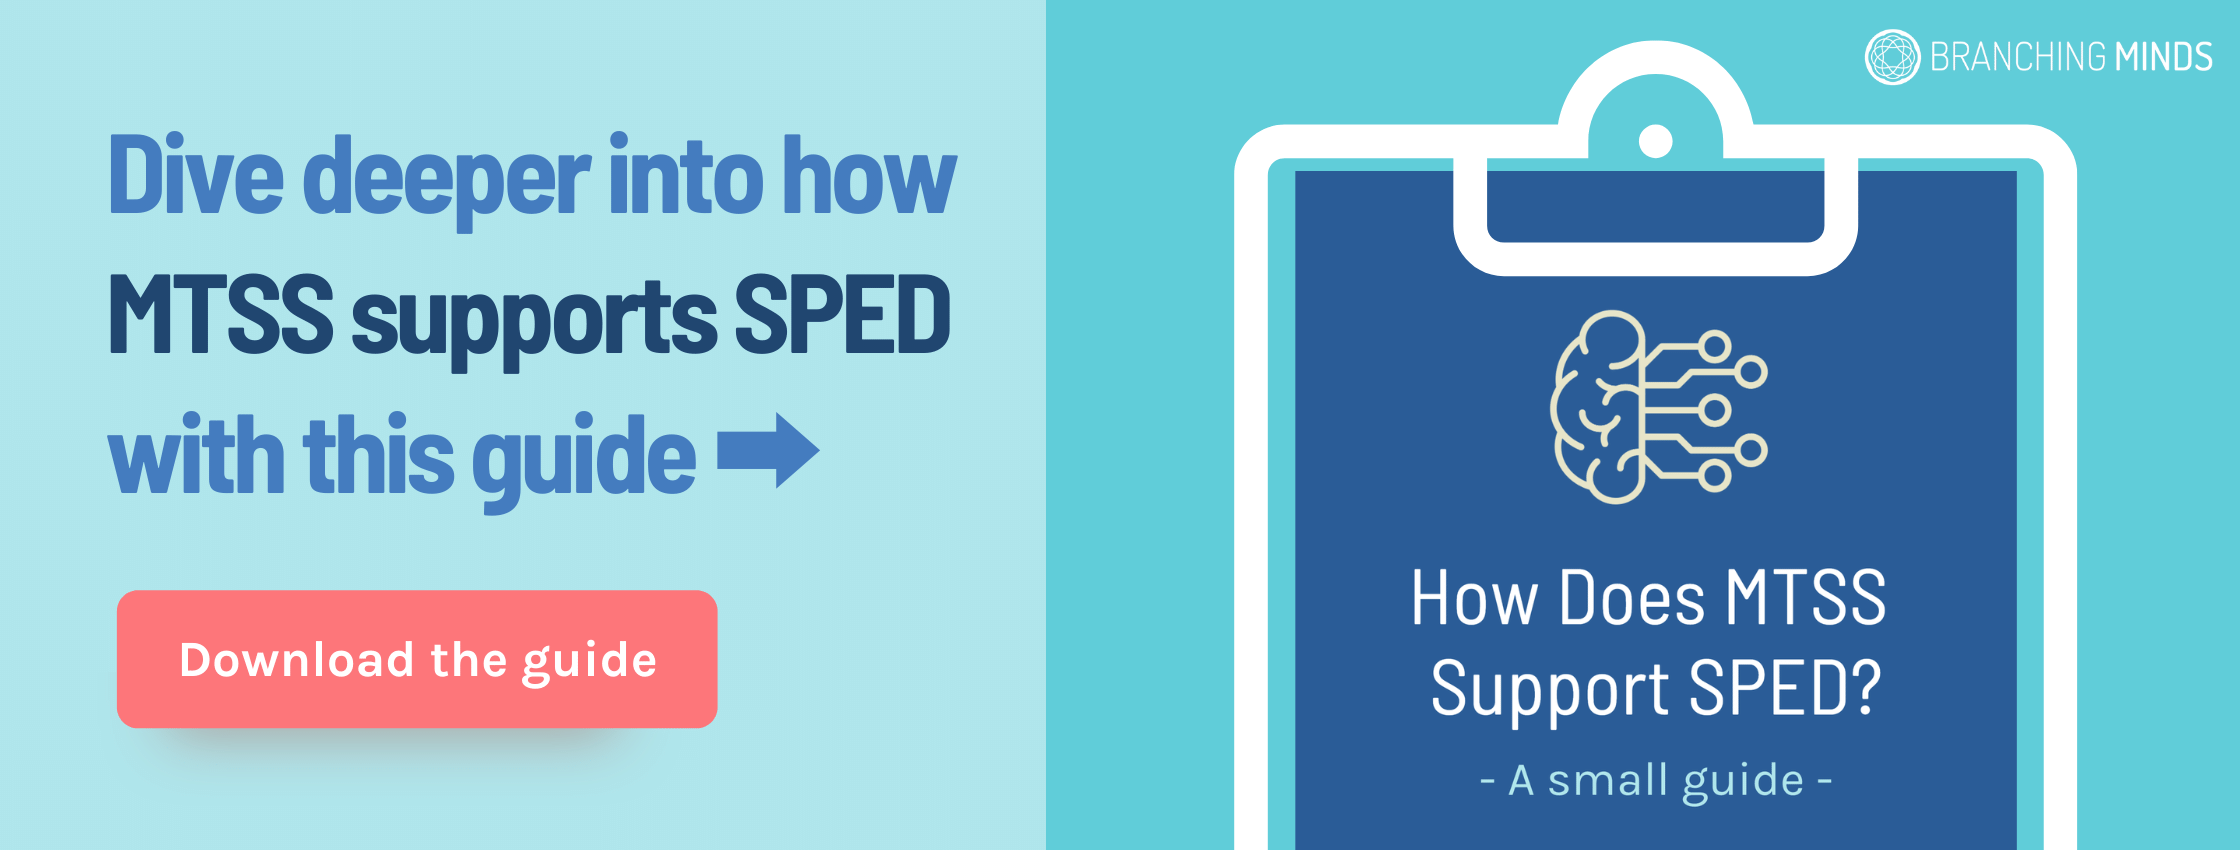 sped-mtss-guide